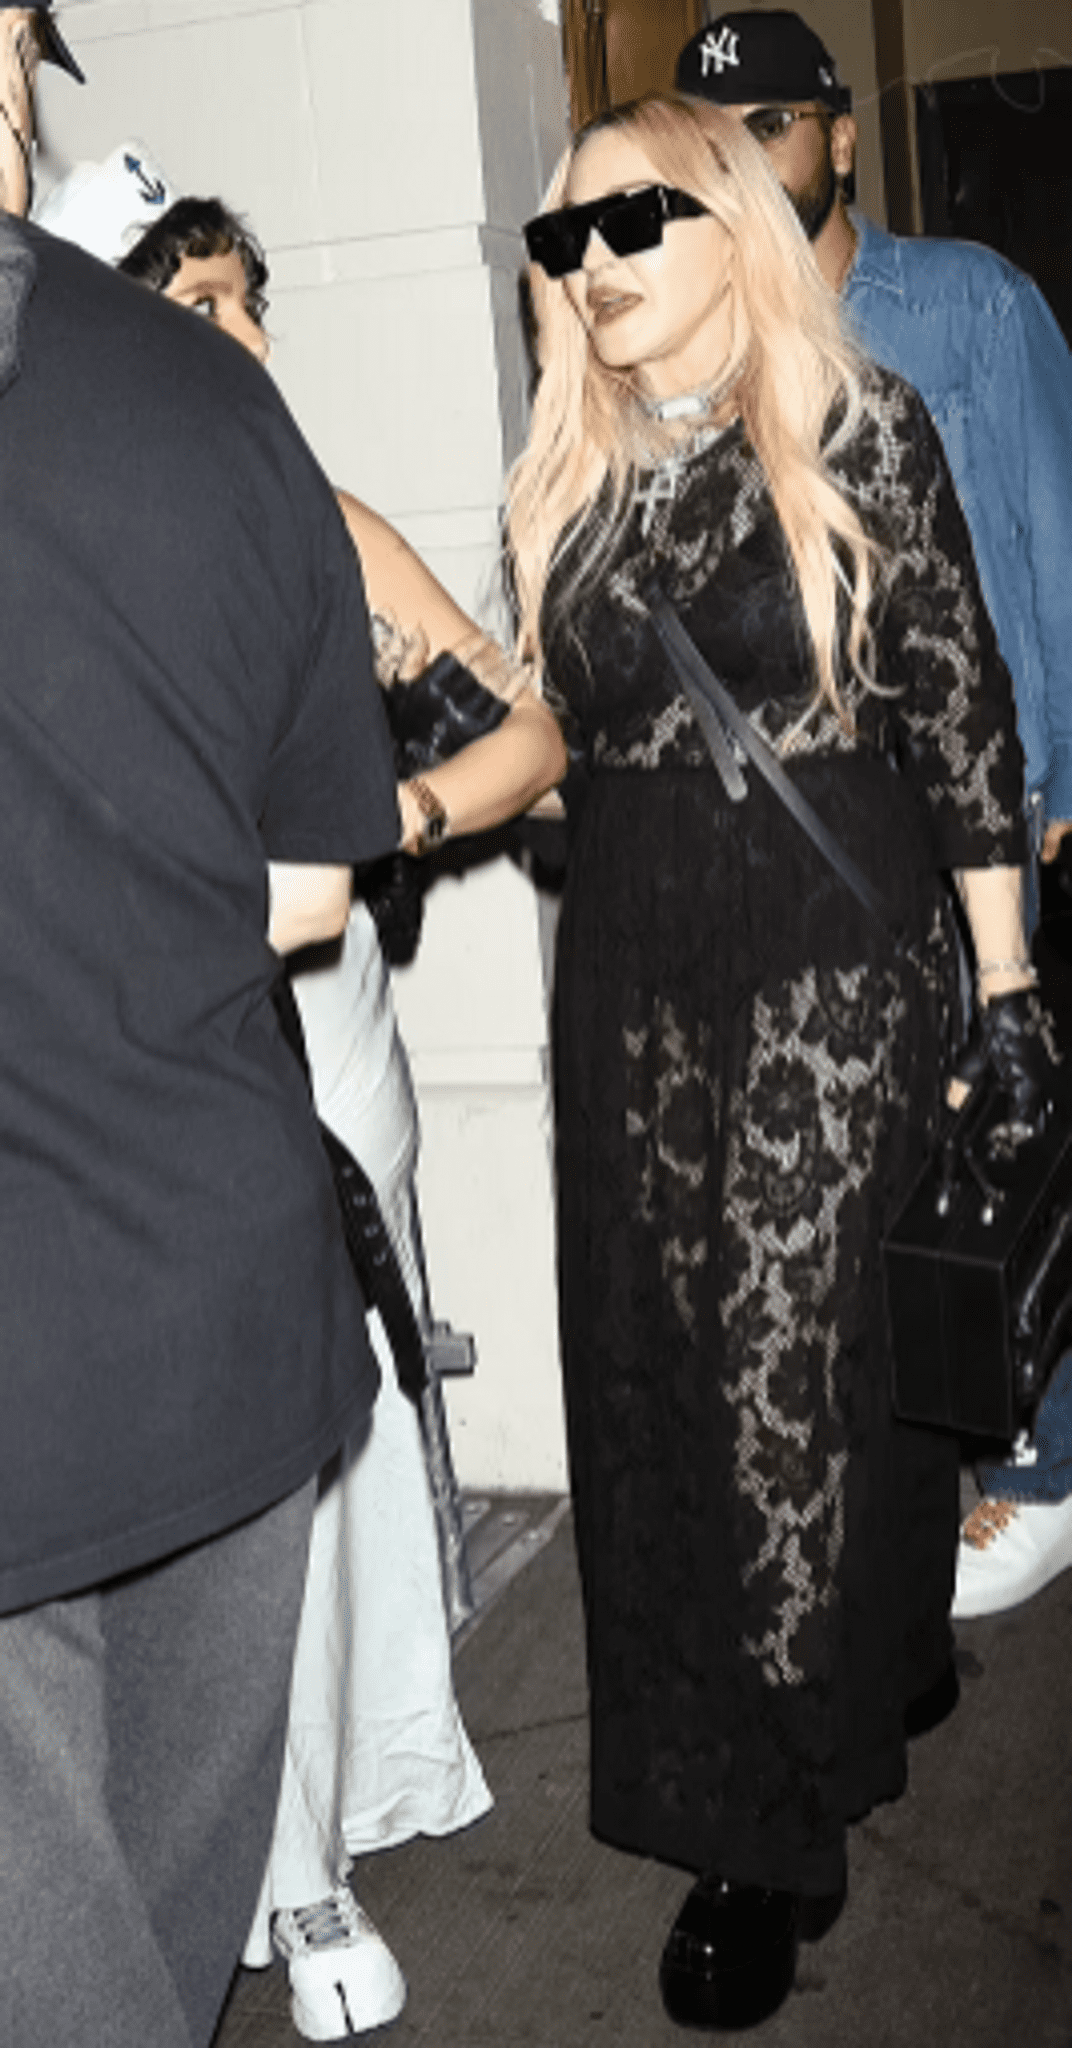 As She Exits MJ, Madonna Puts Up A Spectacle By Flashing Her Bra And Underpants While Wearing A Sheer Black Lace Dress